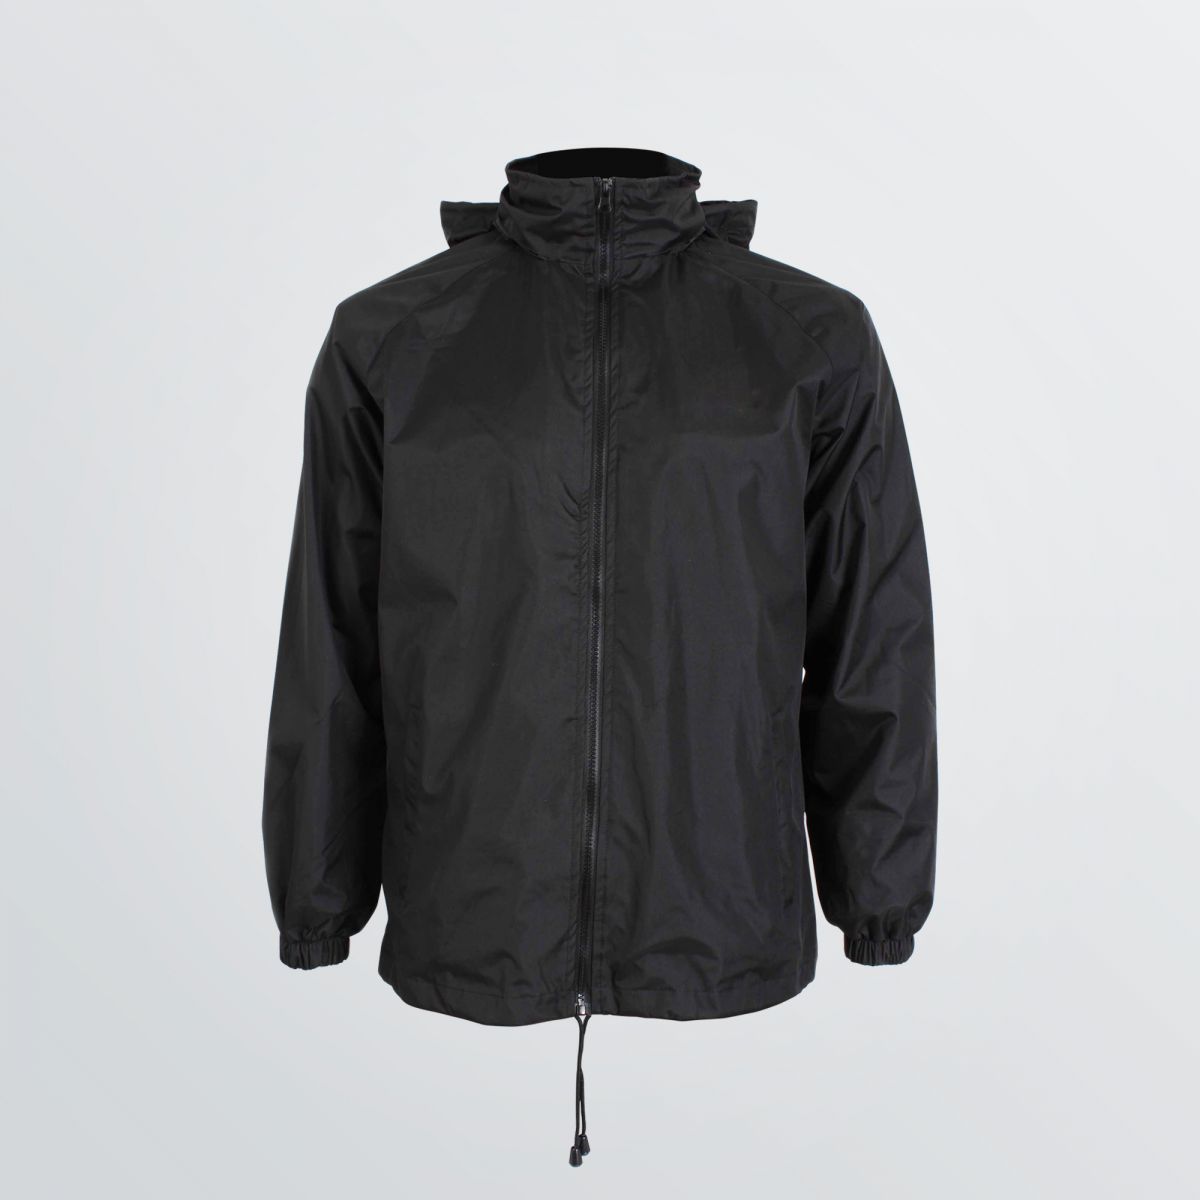 customisable Crew Jacket as a classical one-coloured transition jacket - colour example black front view